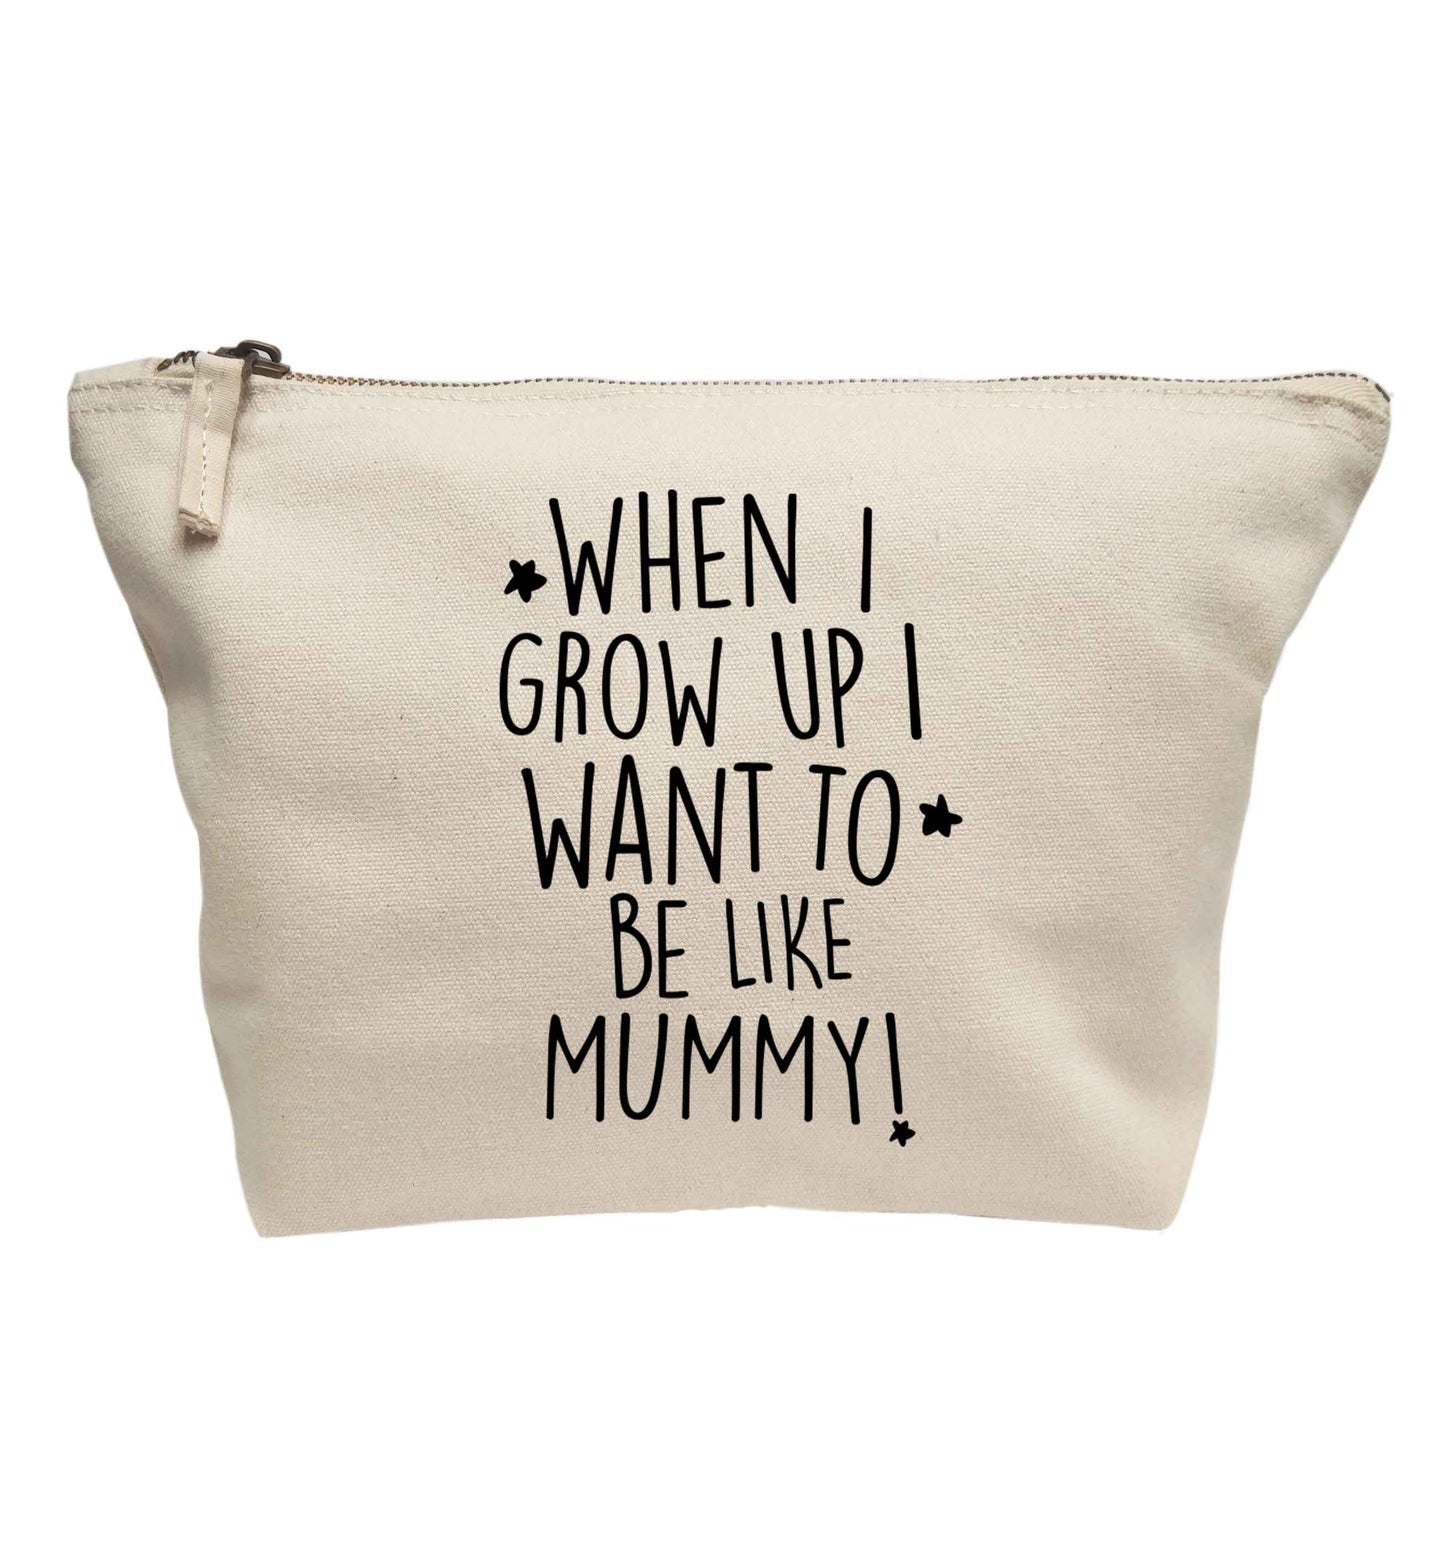 When I grow up I want to be like my mummy | Makeup / wash bag